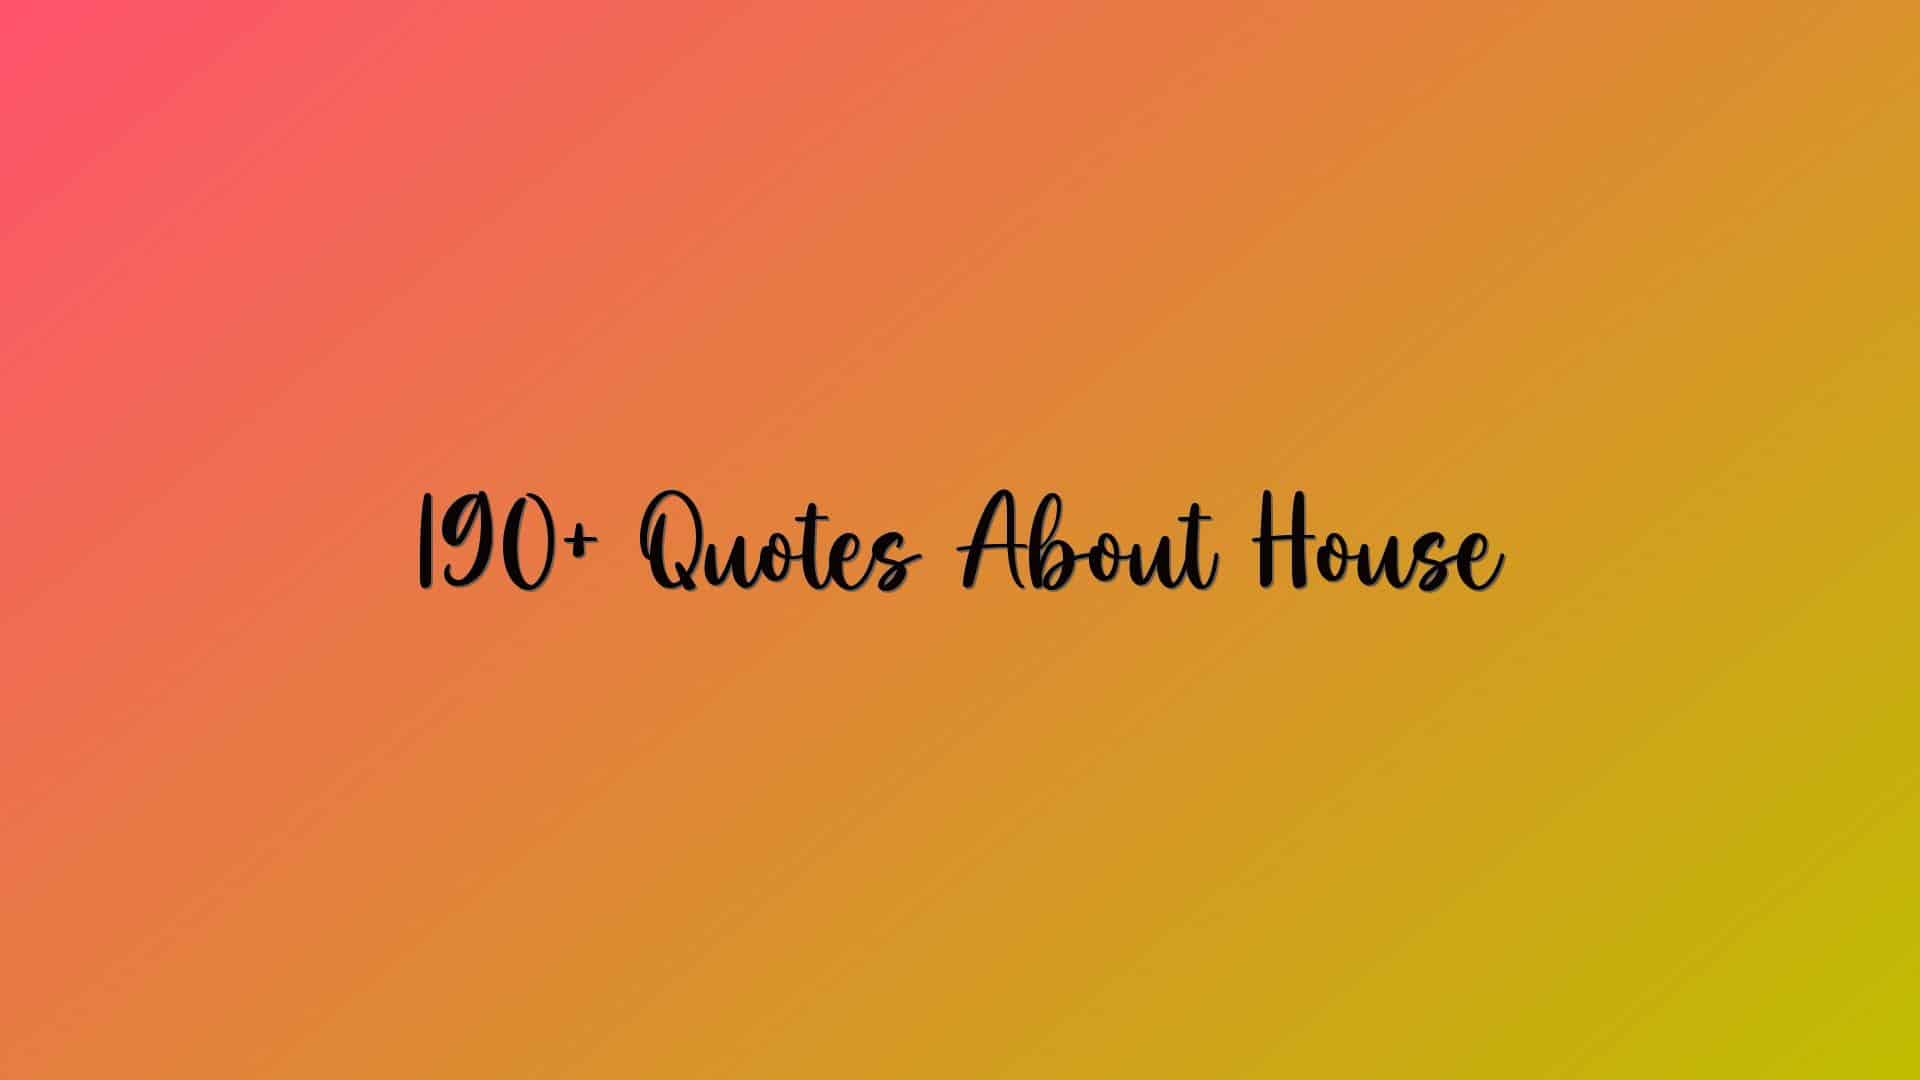 190+ Quotes About House